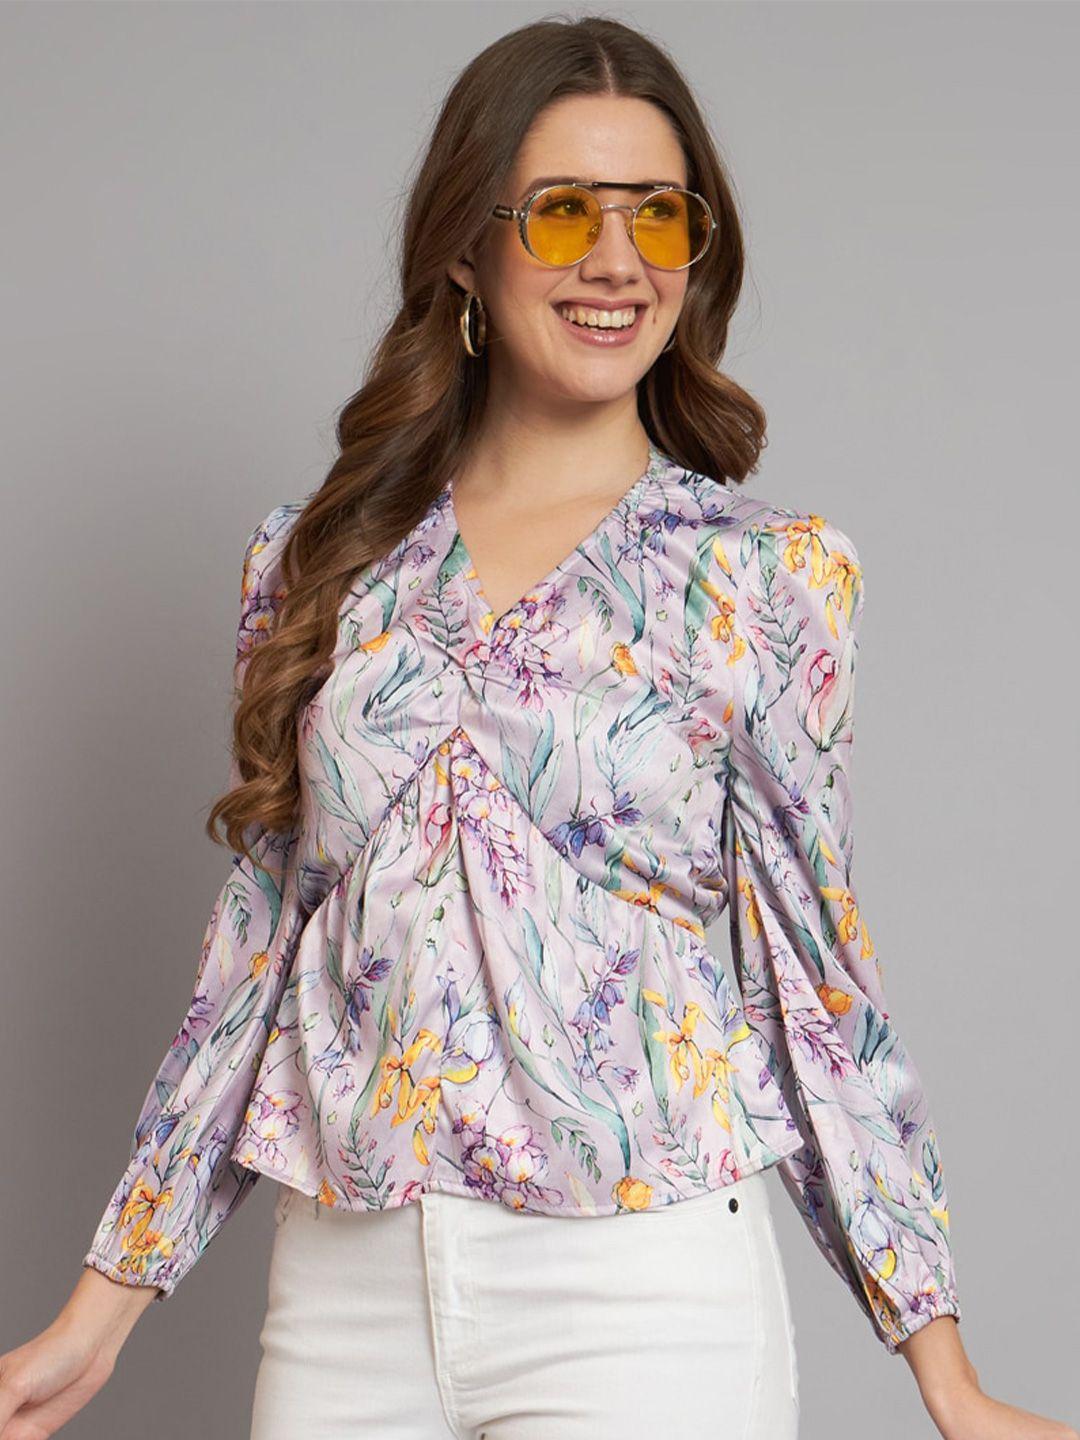 the-dry-state-lavender-floral-printed-cinched-waist-top